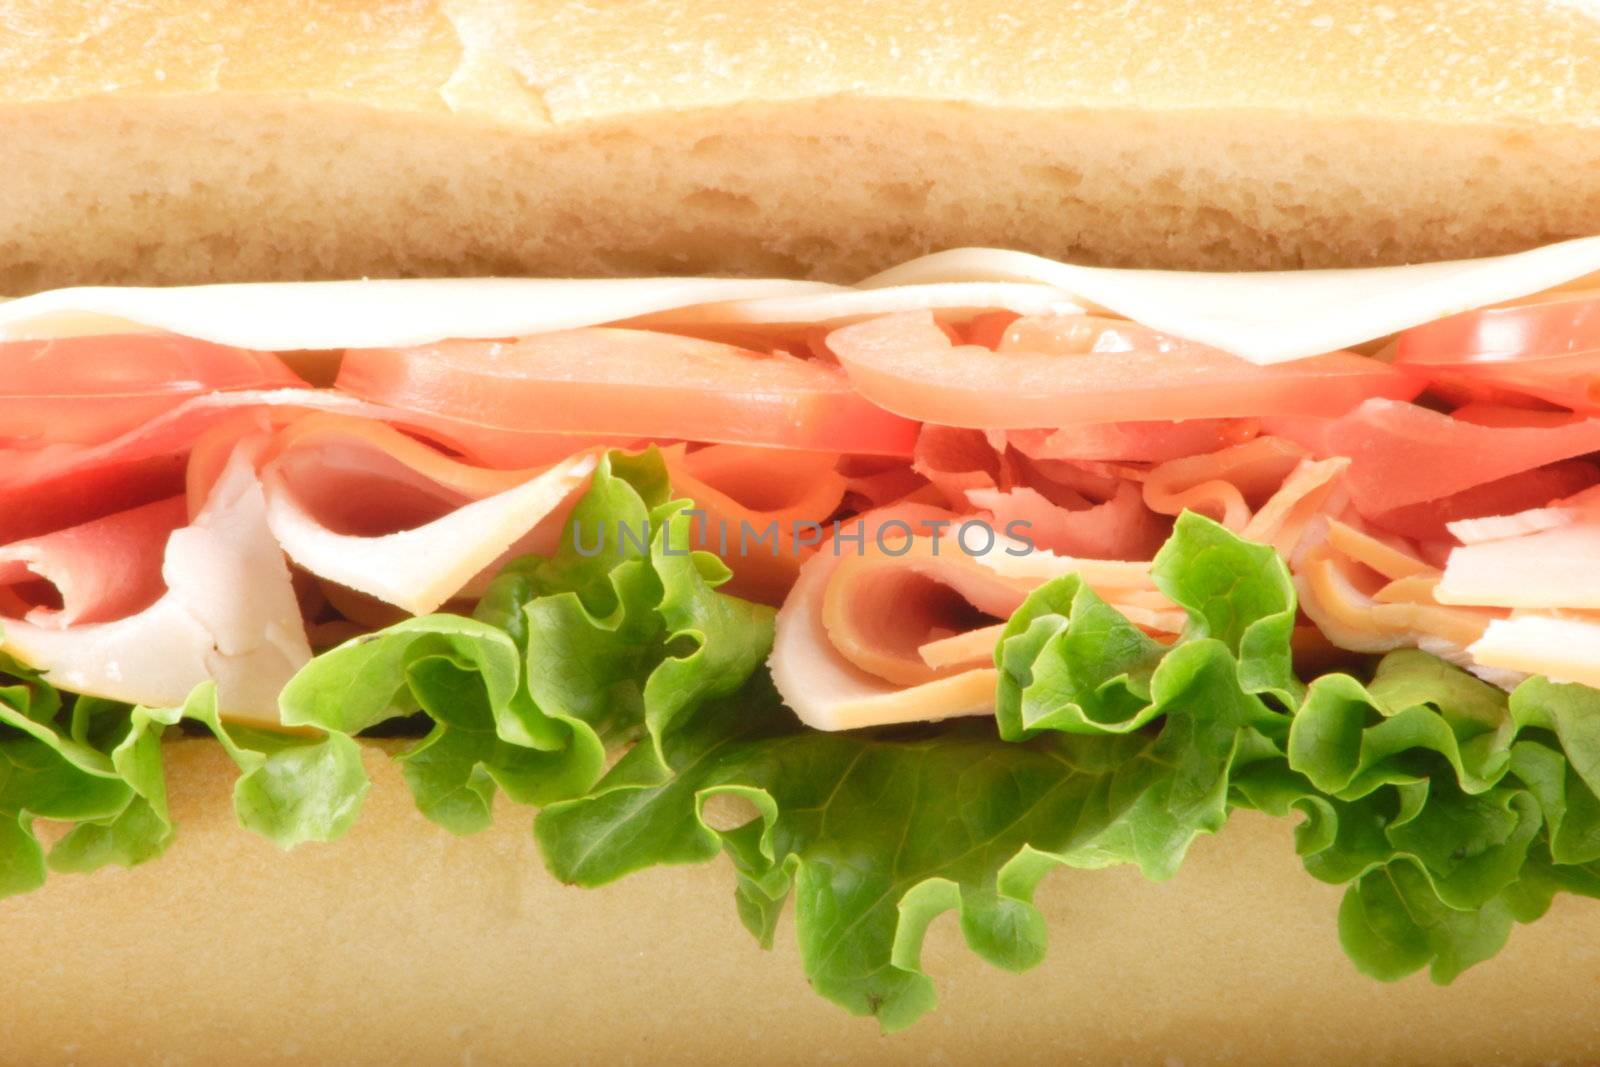 very well made sandwich with fresh prosciutto and other prime ingredients  